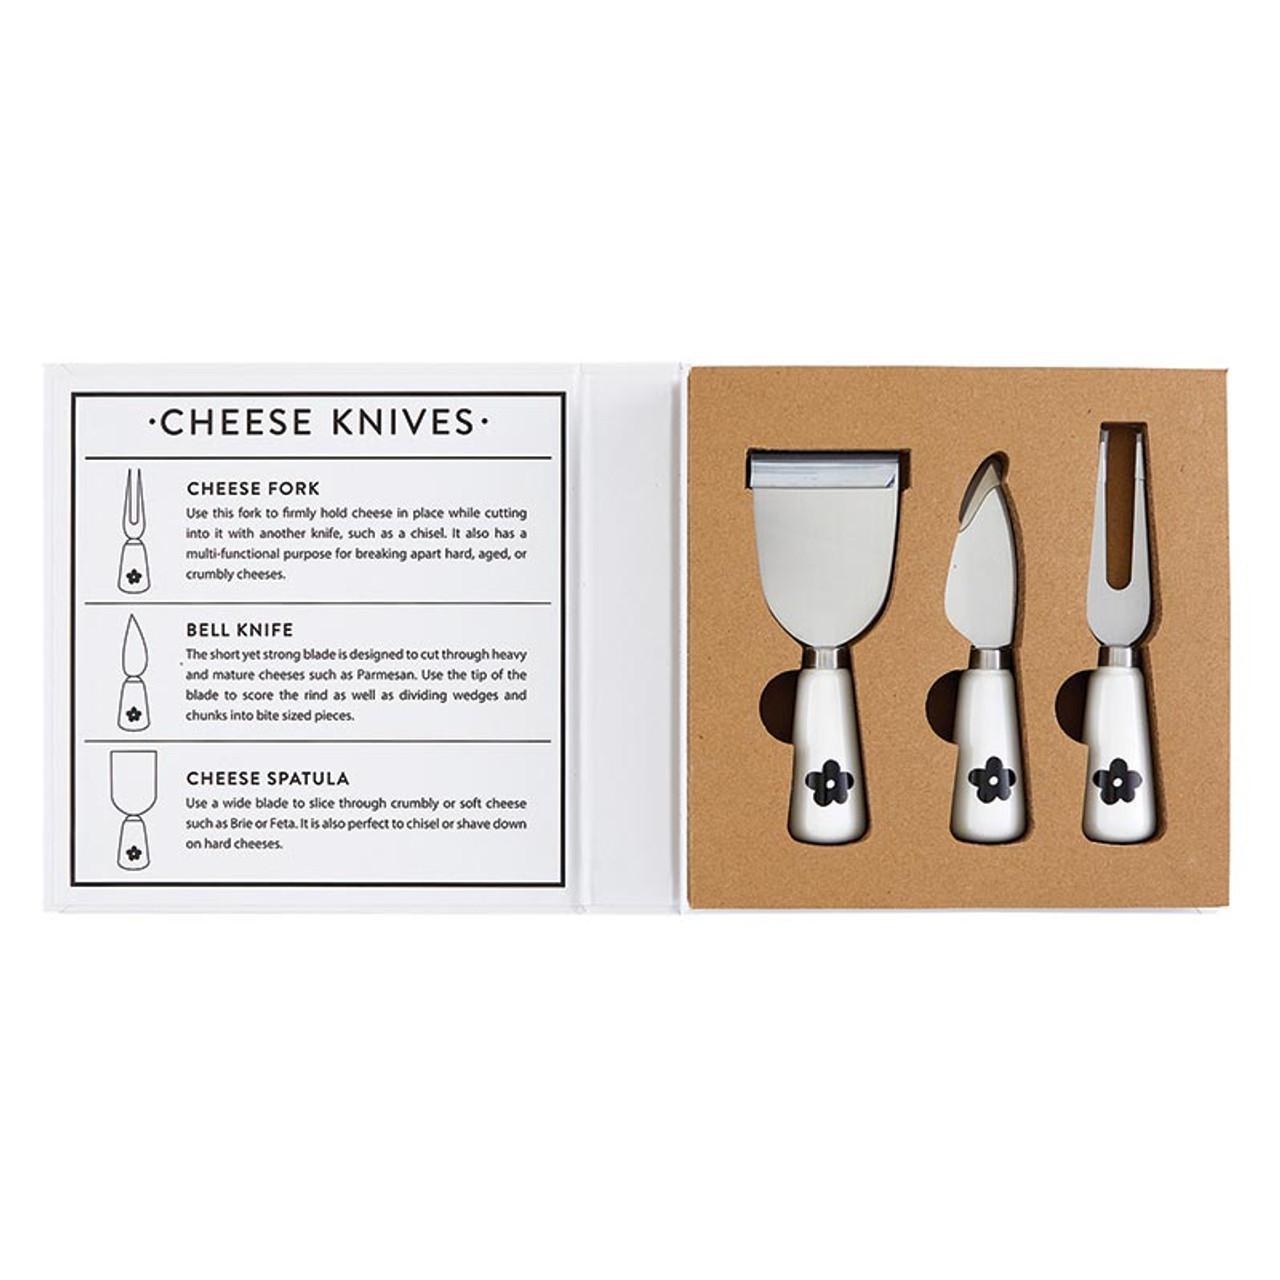 Daisy Cheese Knives Book Box - For the Love of Cheese